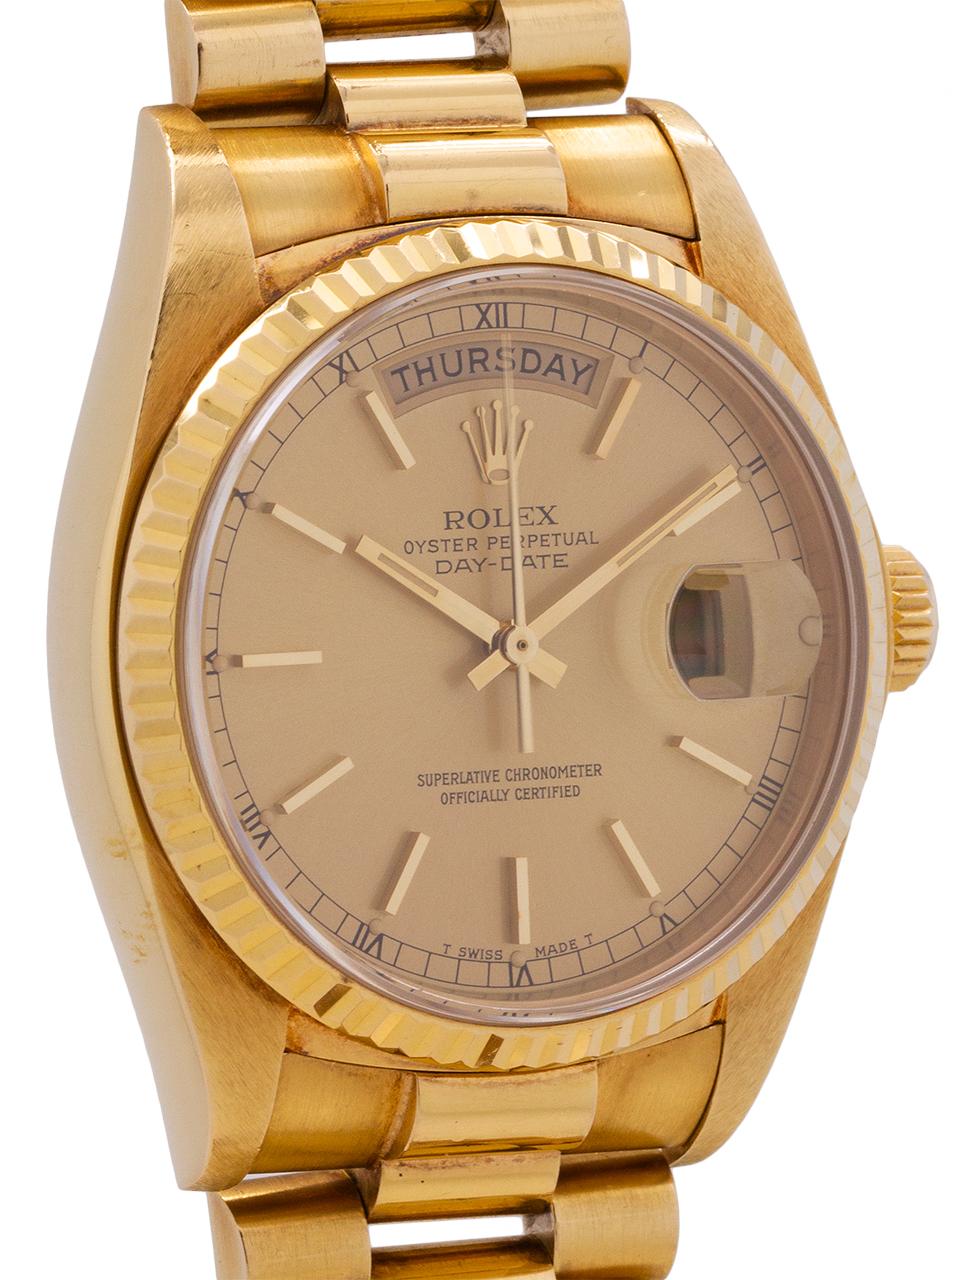 
Rolex ref# 18038 18K YG Day Date President serial# 6.6 million circa 1981. Featuring 36mm diameter full size man’s model with sapphire crystal and fluted bezel, with clean original champagne dial with applied gold indexes and gold baton hands.